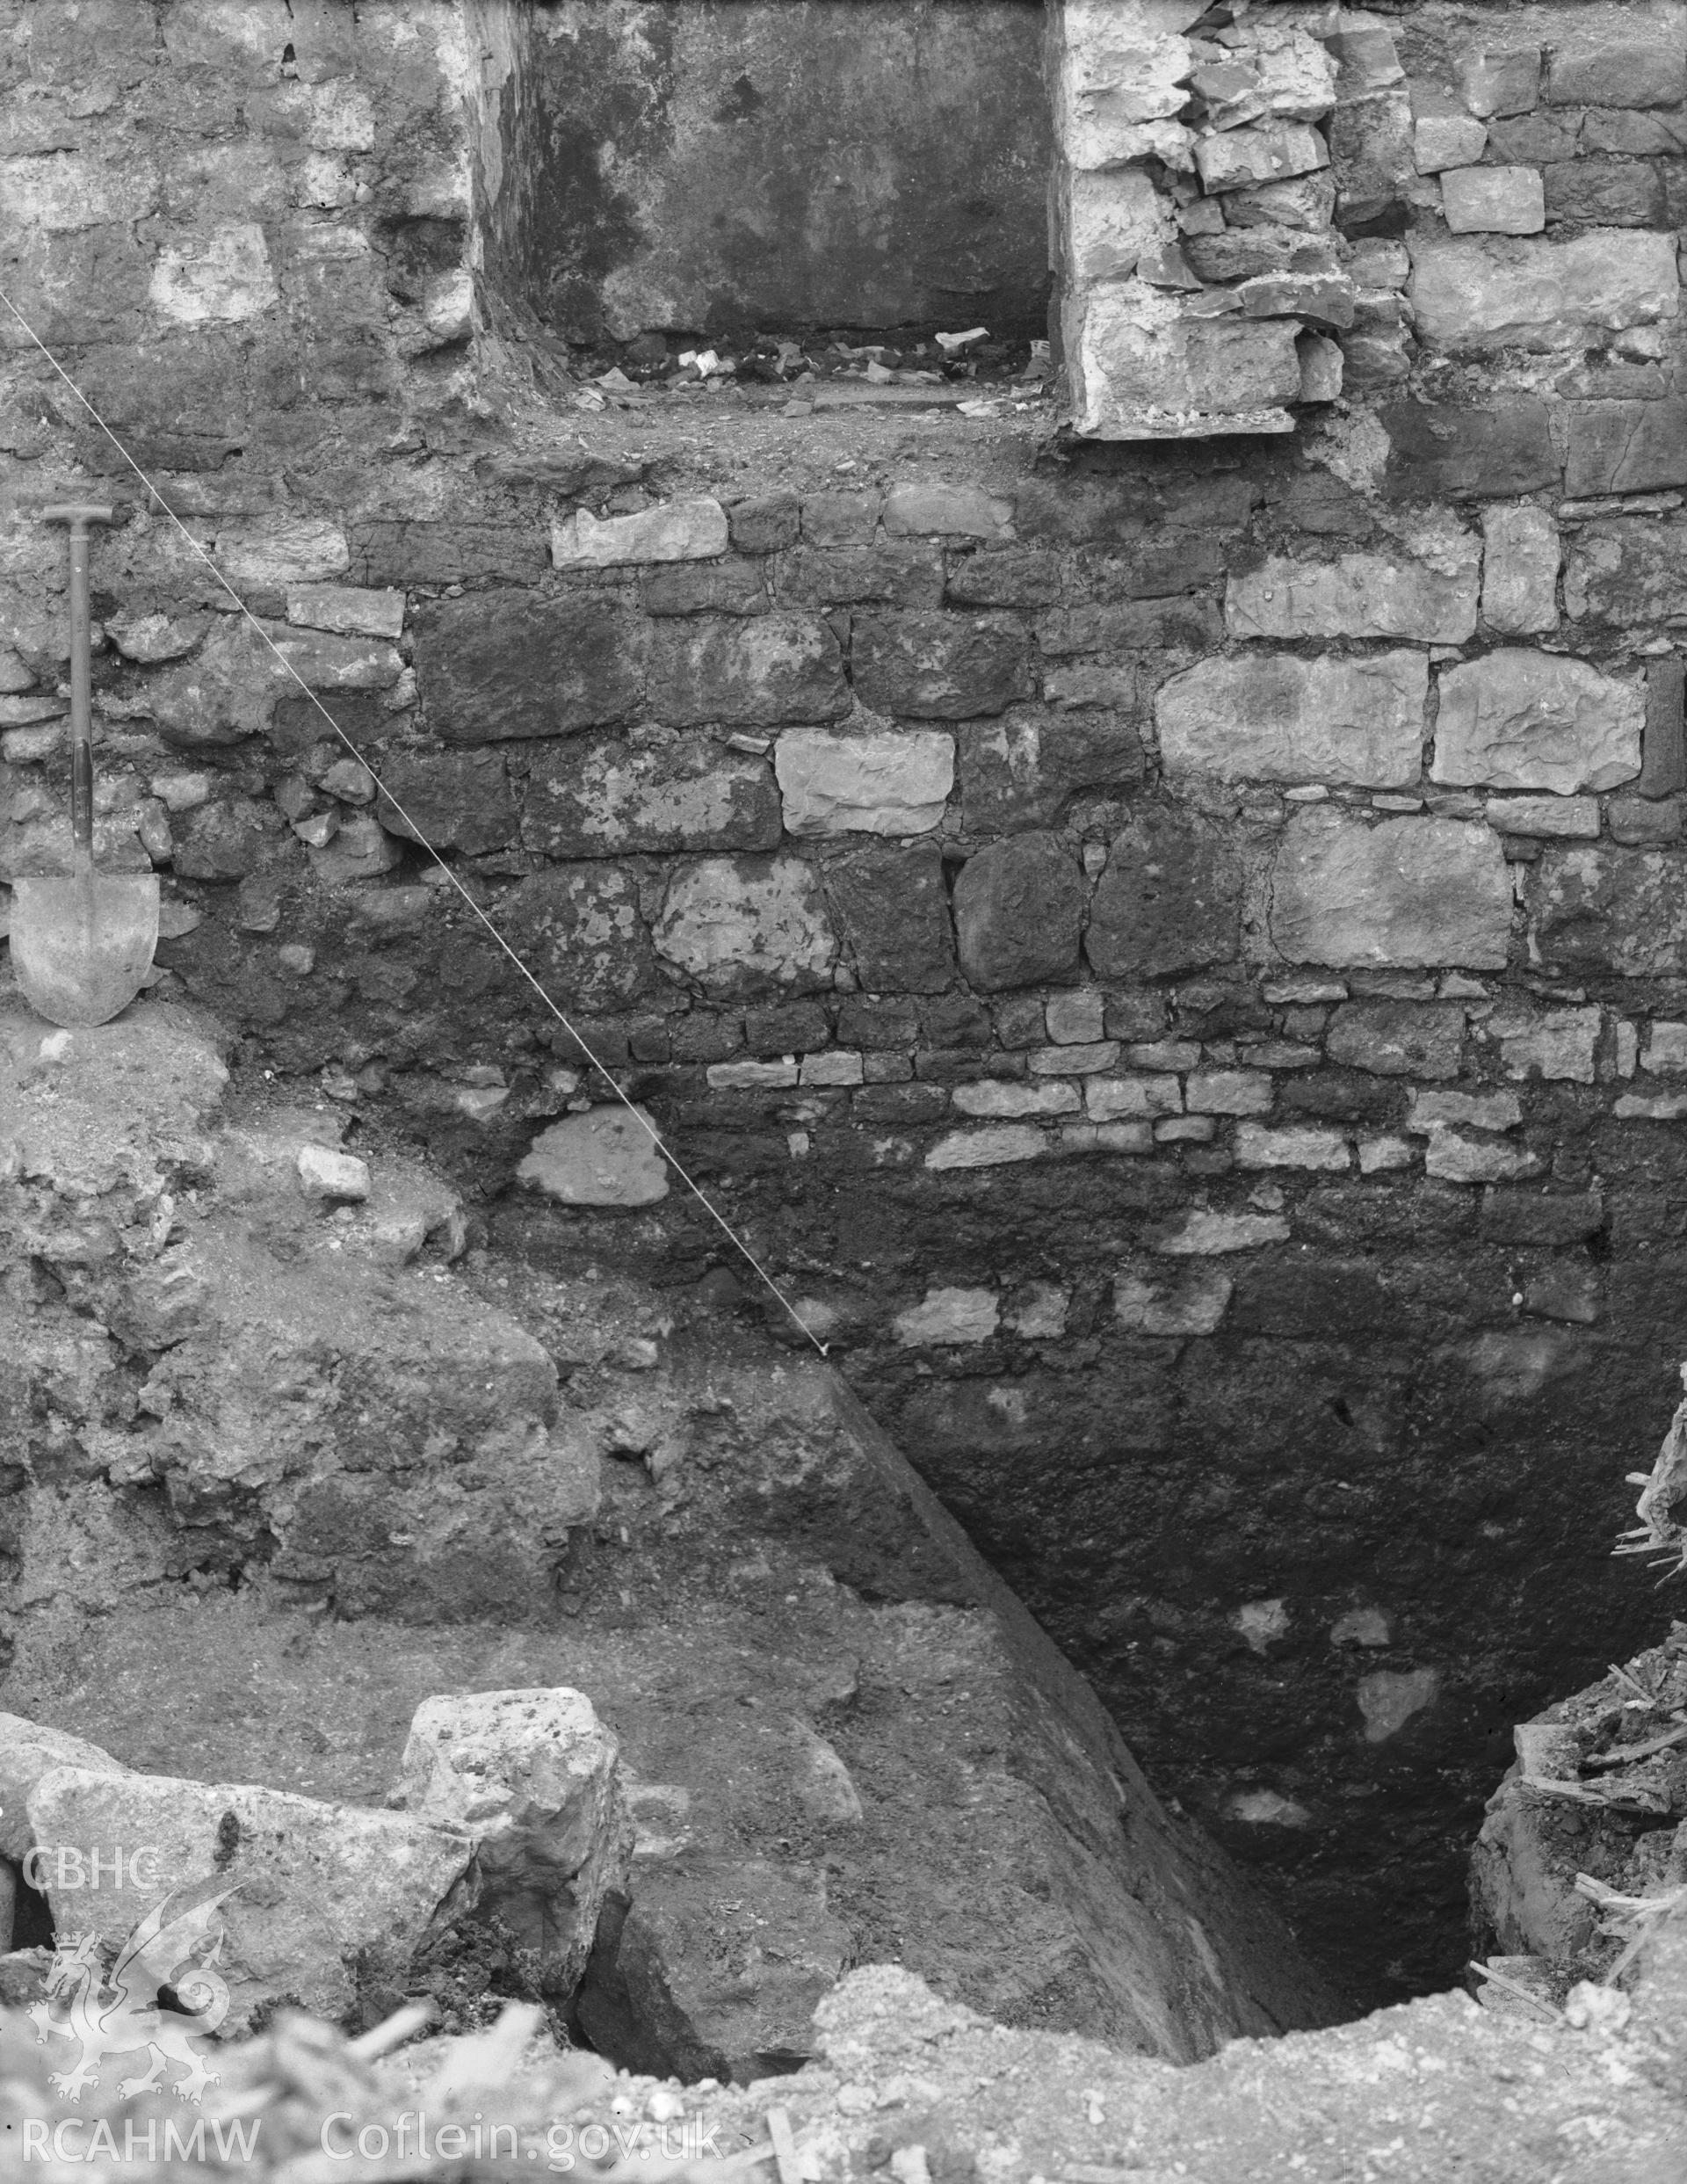 View of a section of Caernarfon Town Wall, Llanbeblig, taken in 1956.